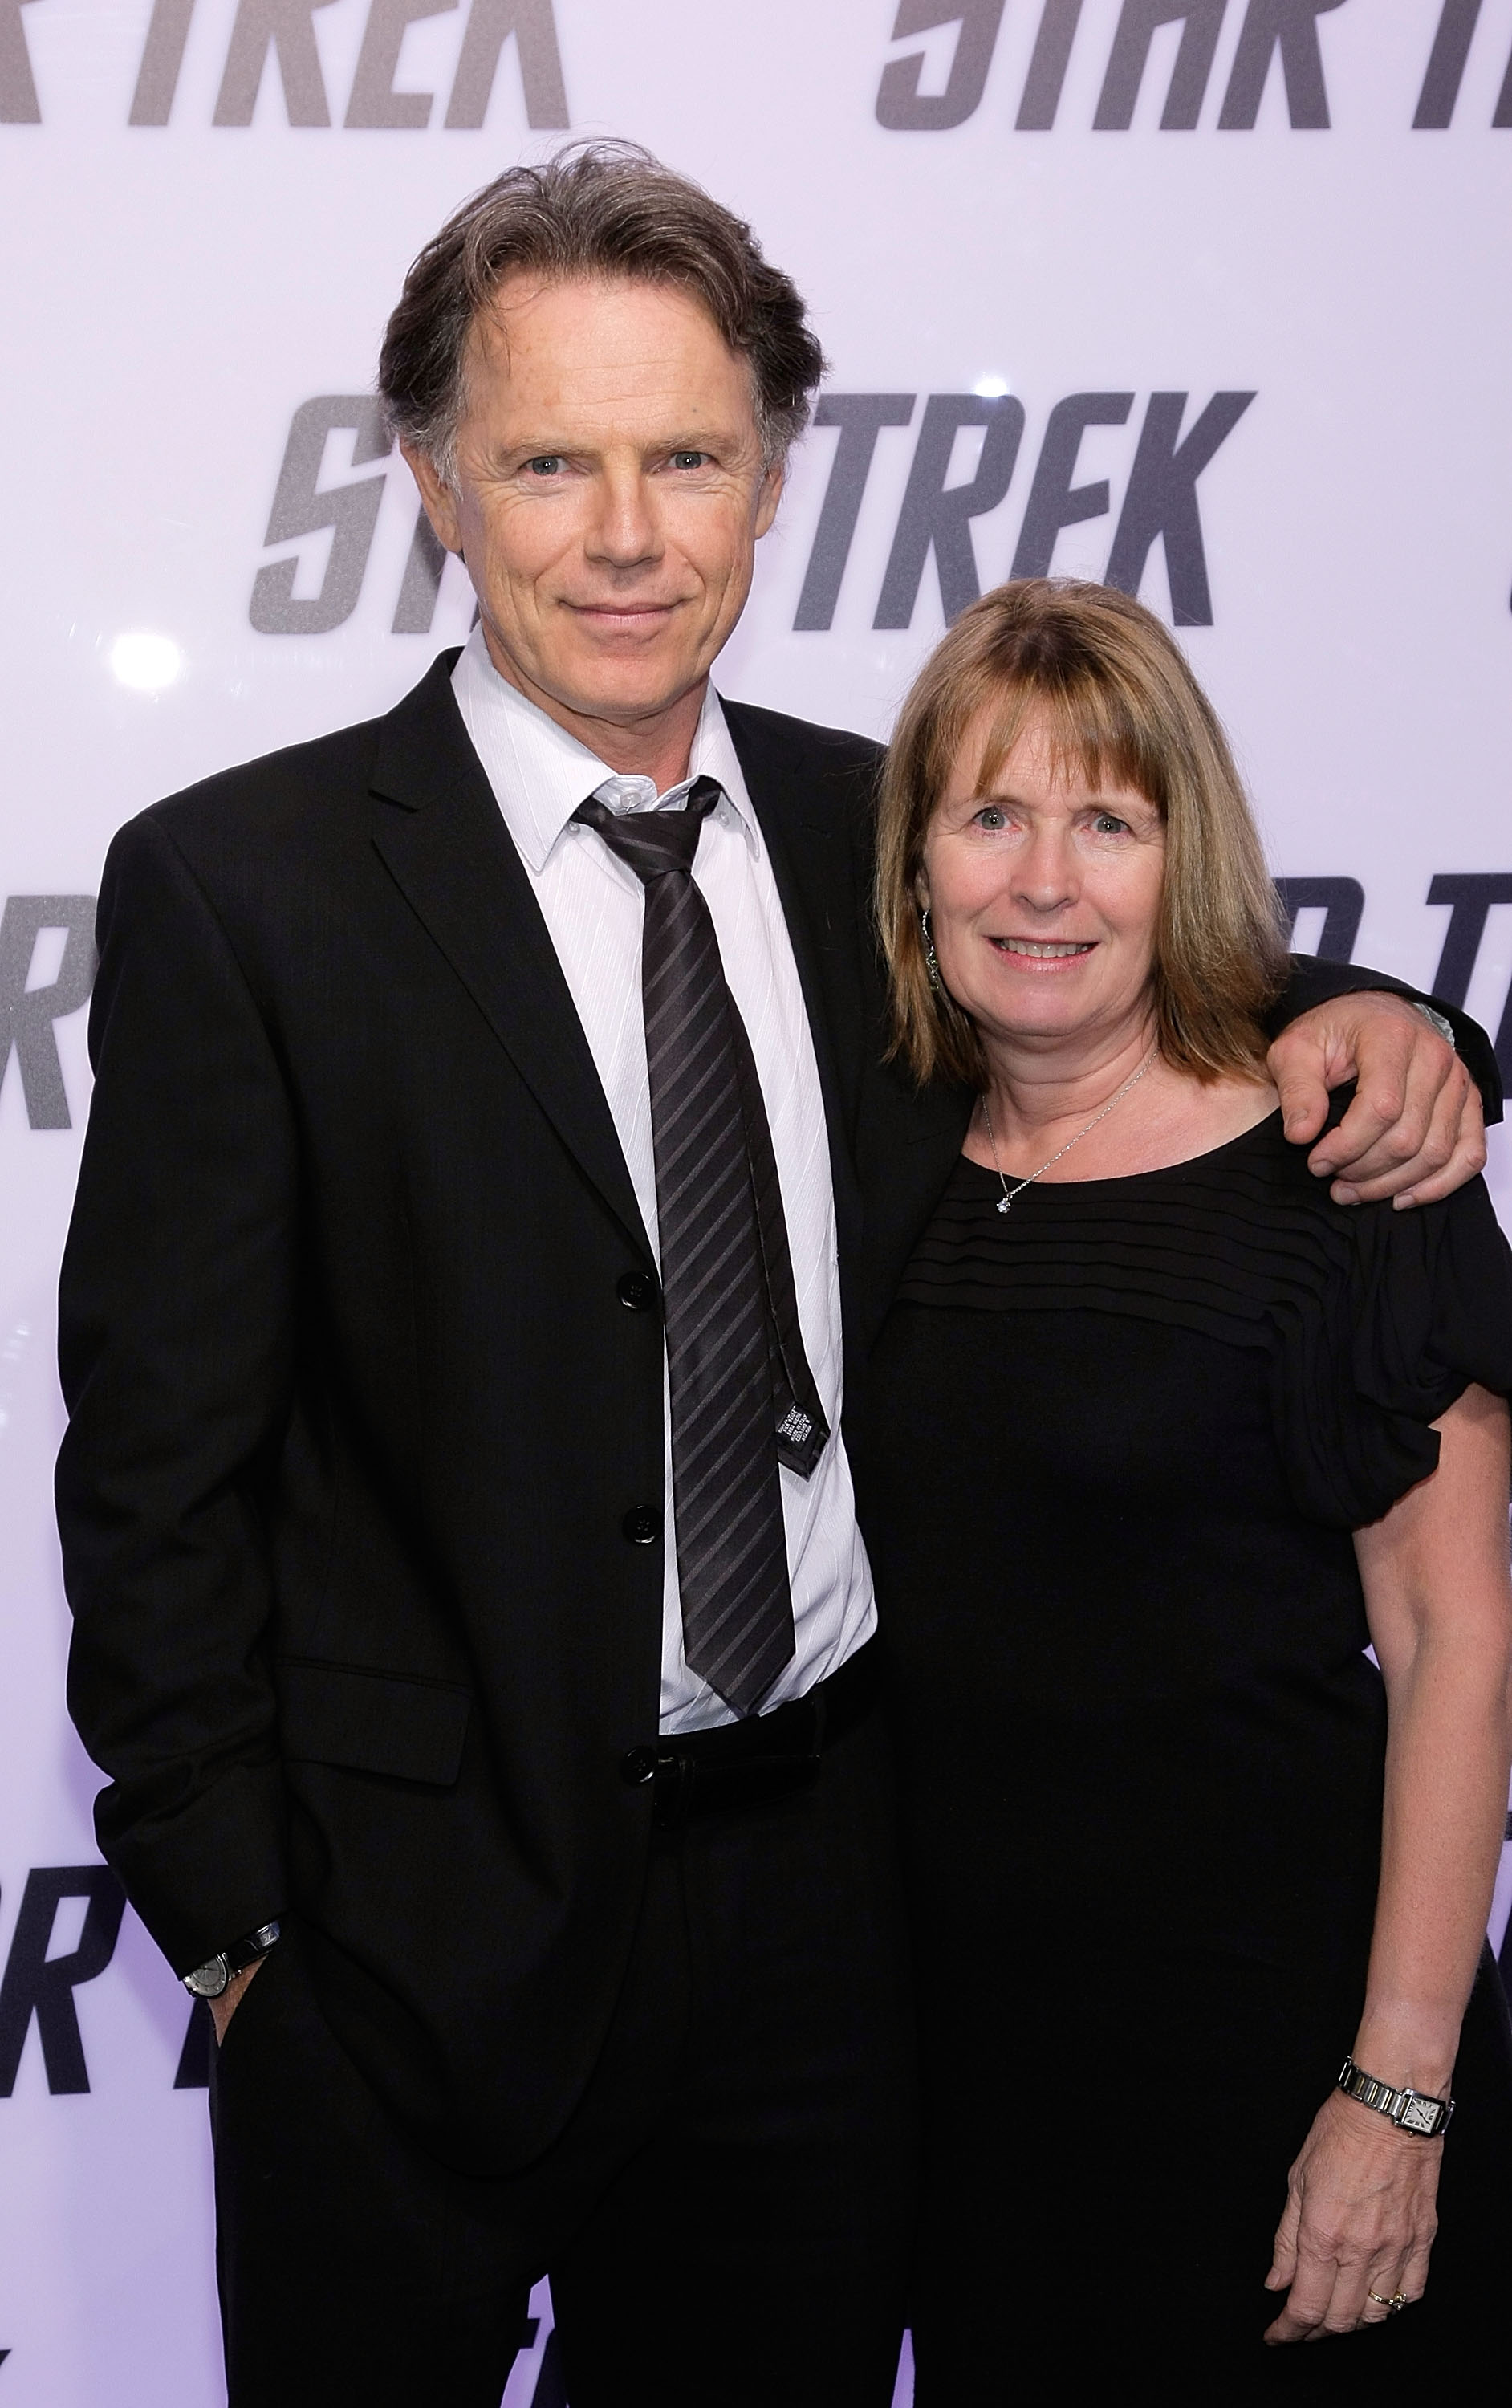 Bruce Greenwood and Susan Devlin at the "Star Trek" DVD and Blu-Ray release party on November 16, 2009, in Los Angeles, California. | Source: Getty Images